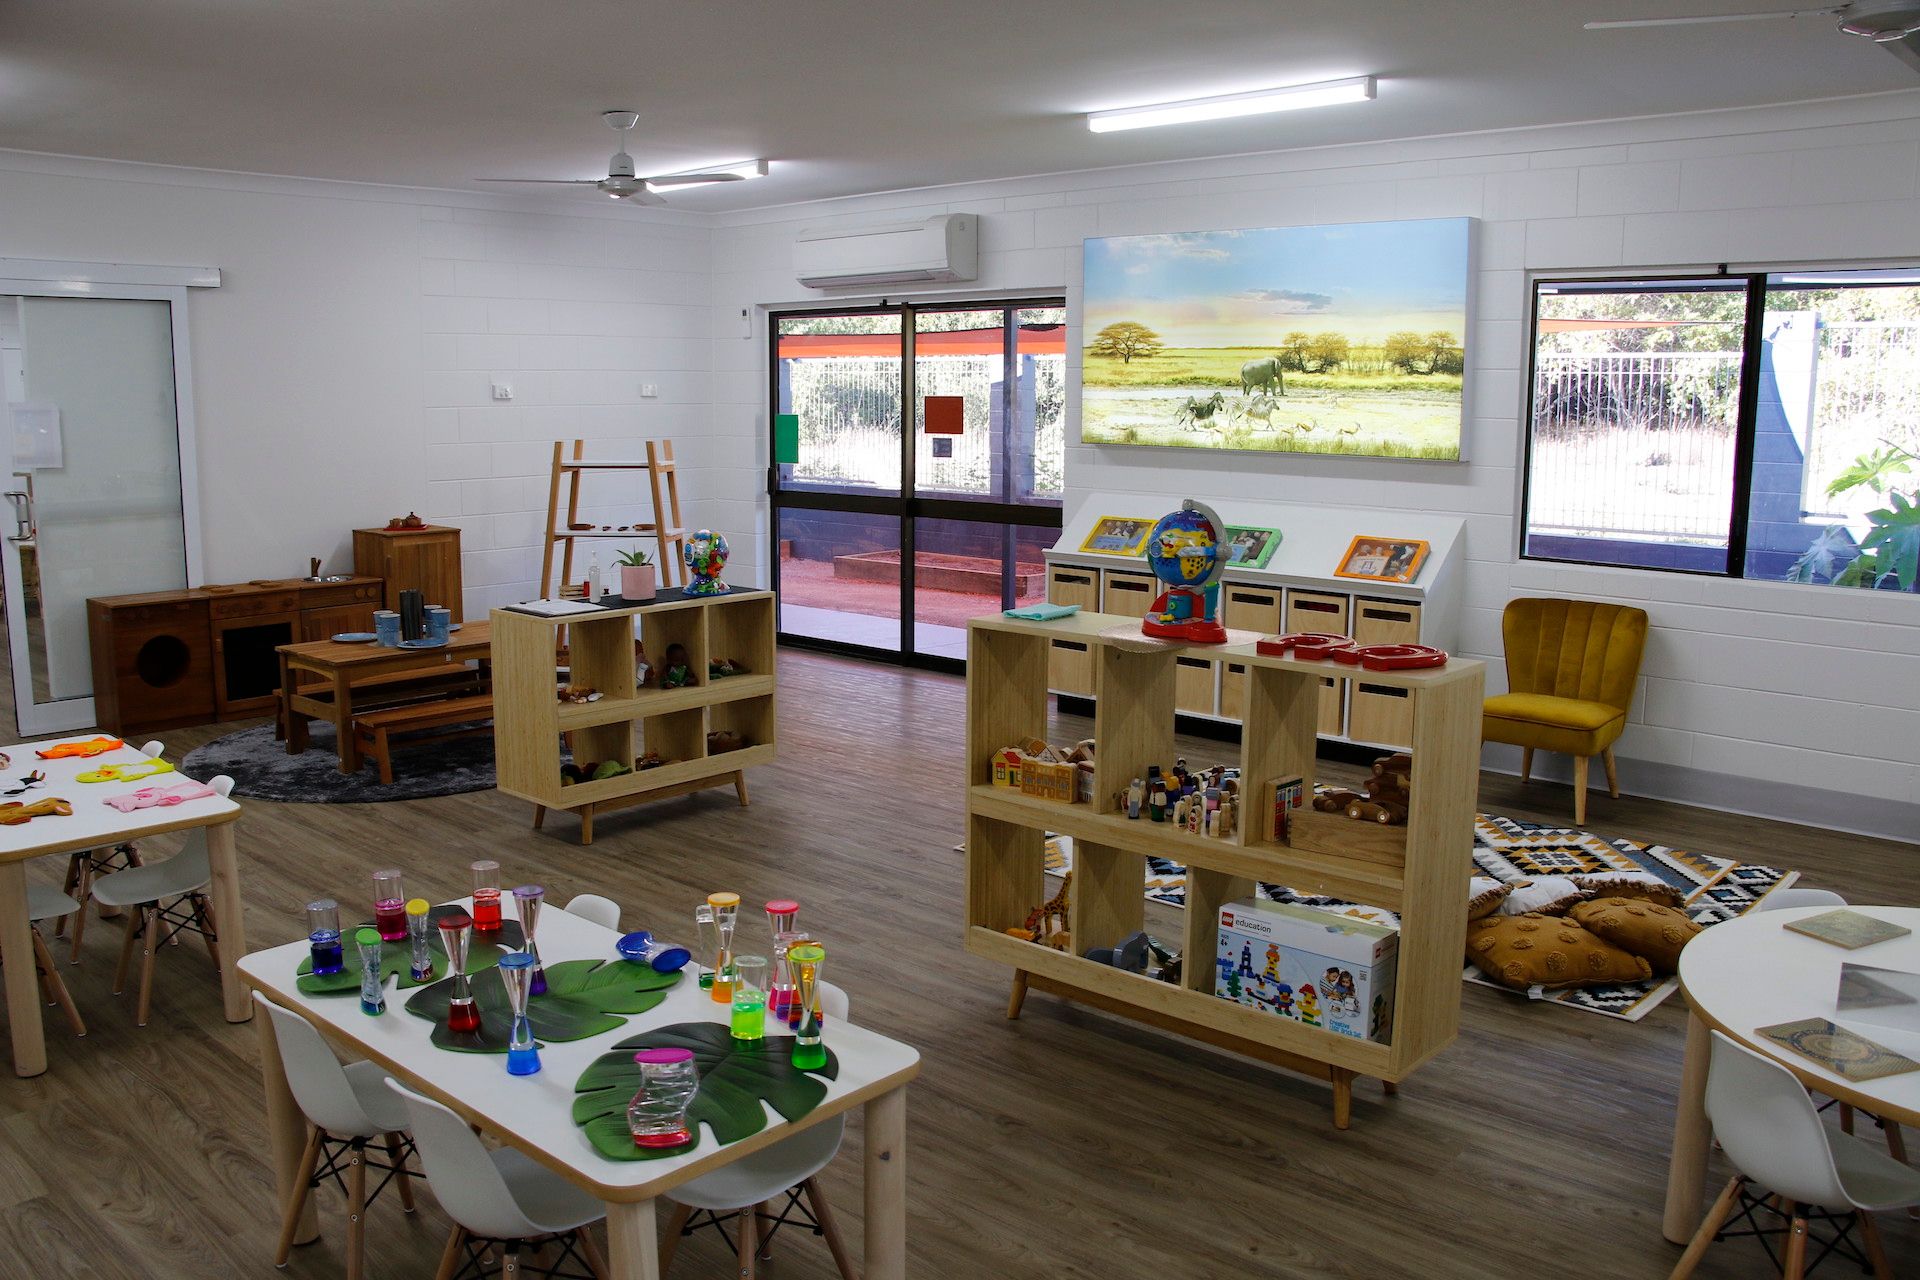 A classroom equipped with toys, books and furniture